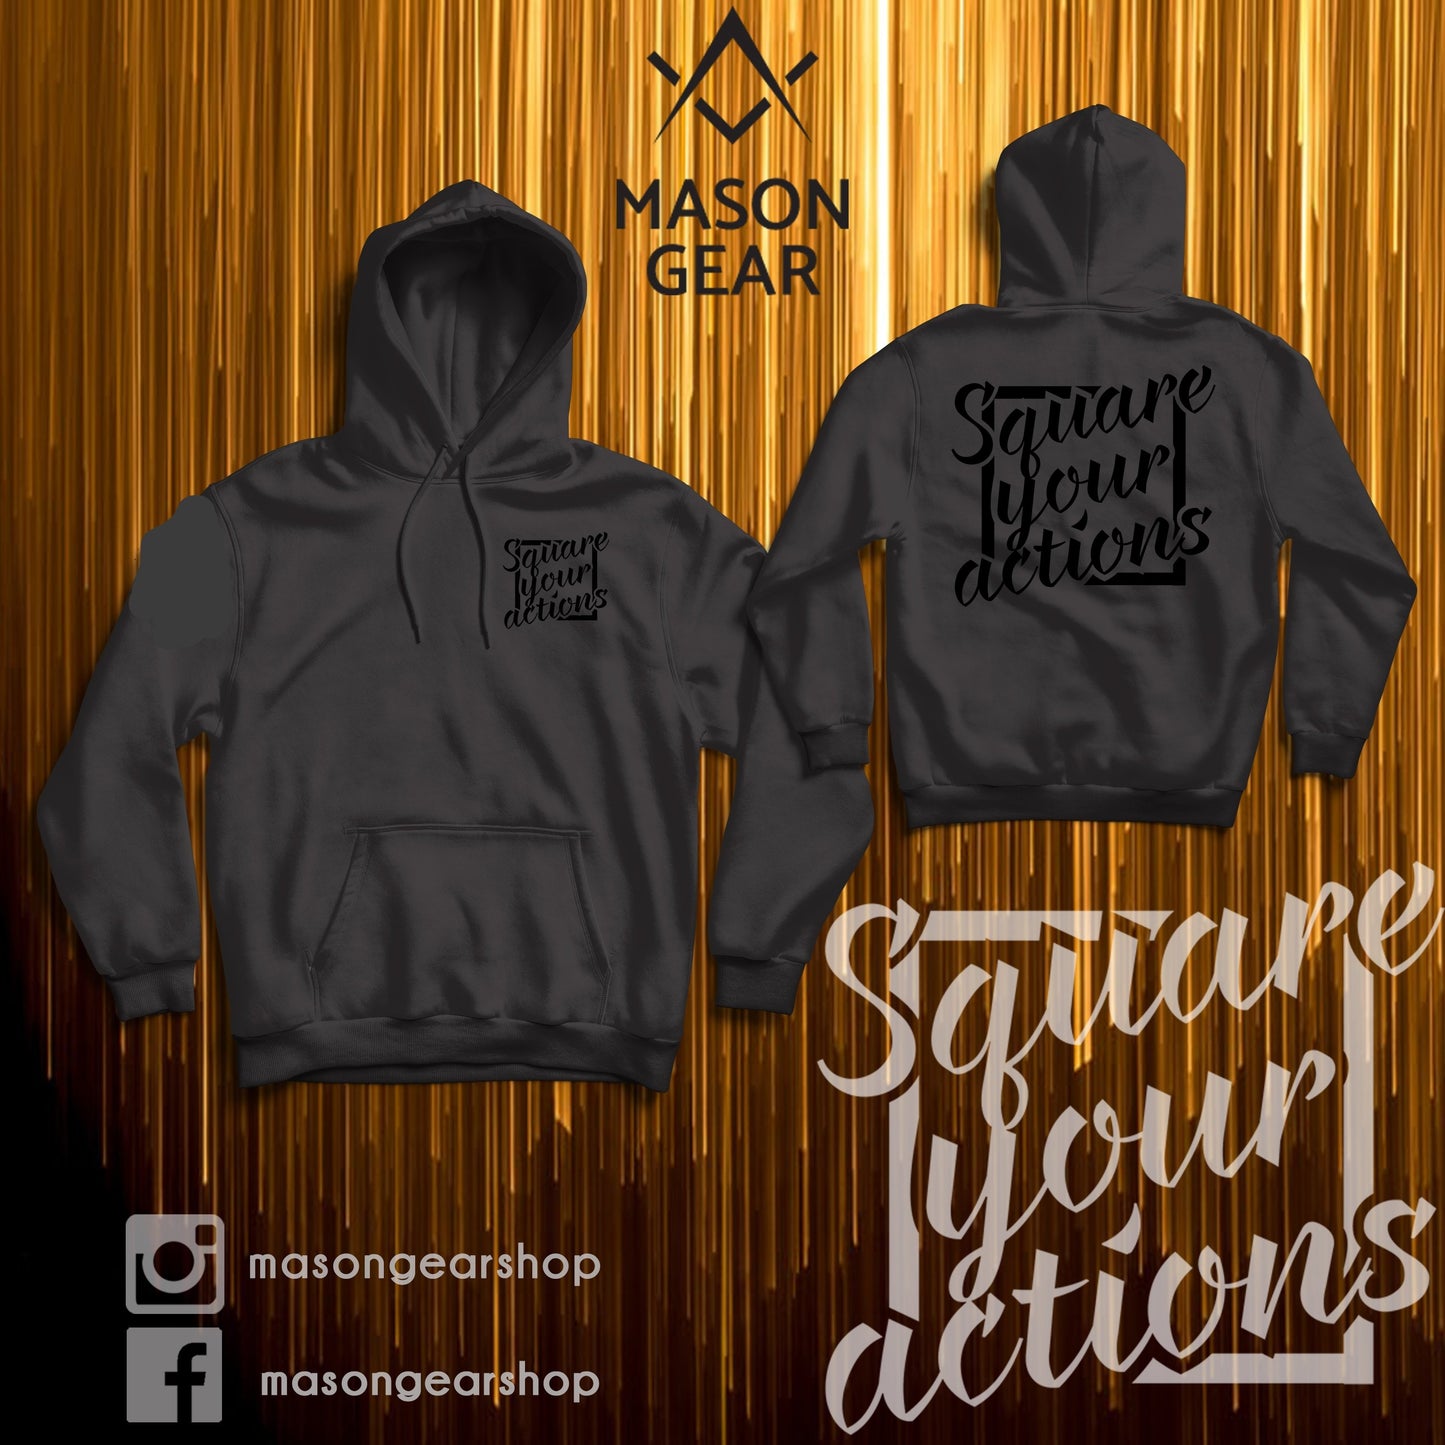 Square your Actions- Hoodie - Mason Gear Shop